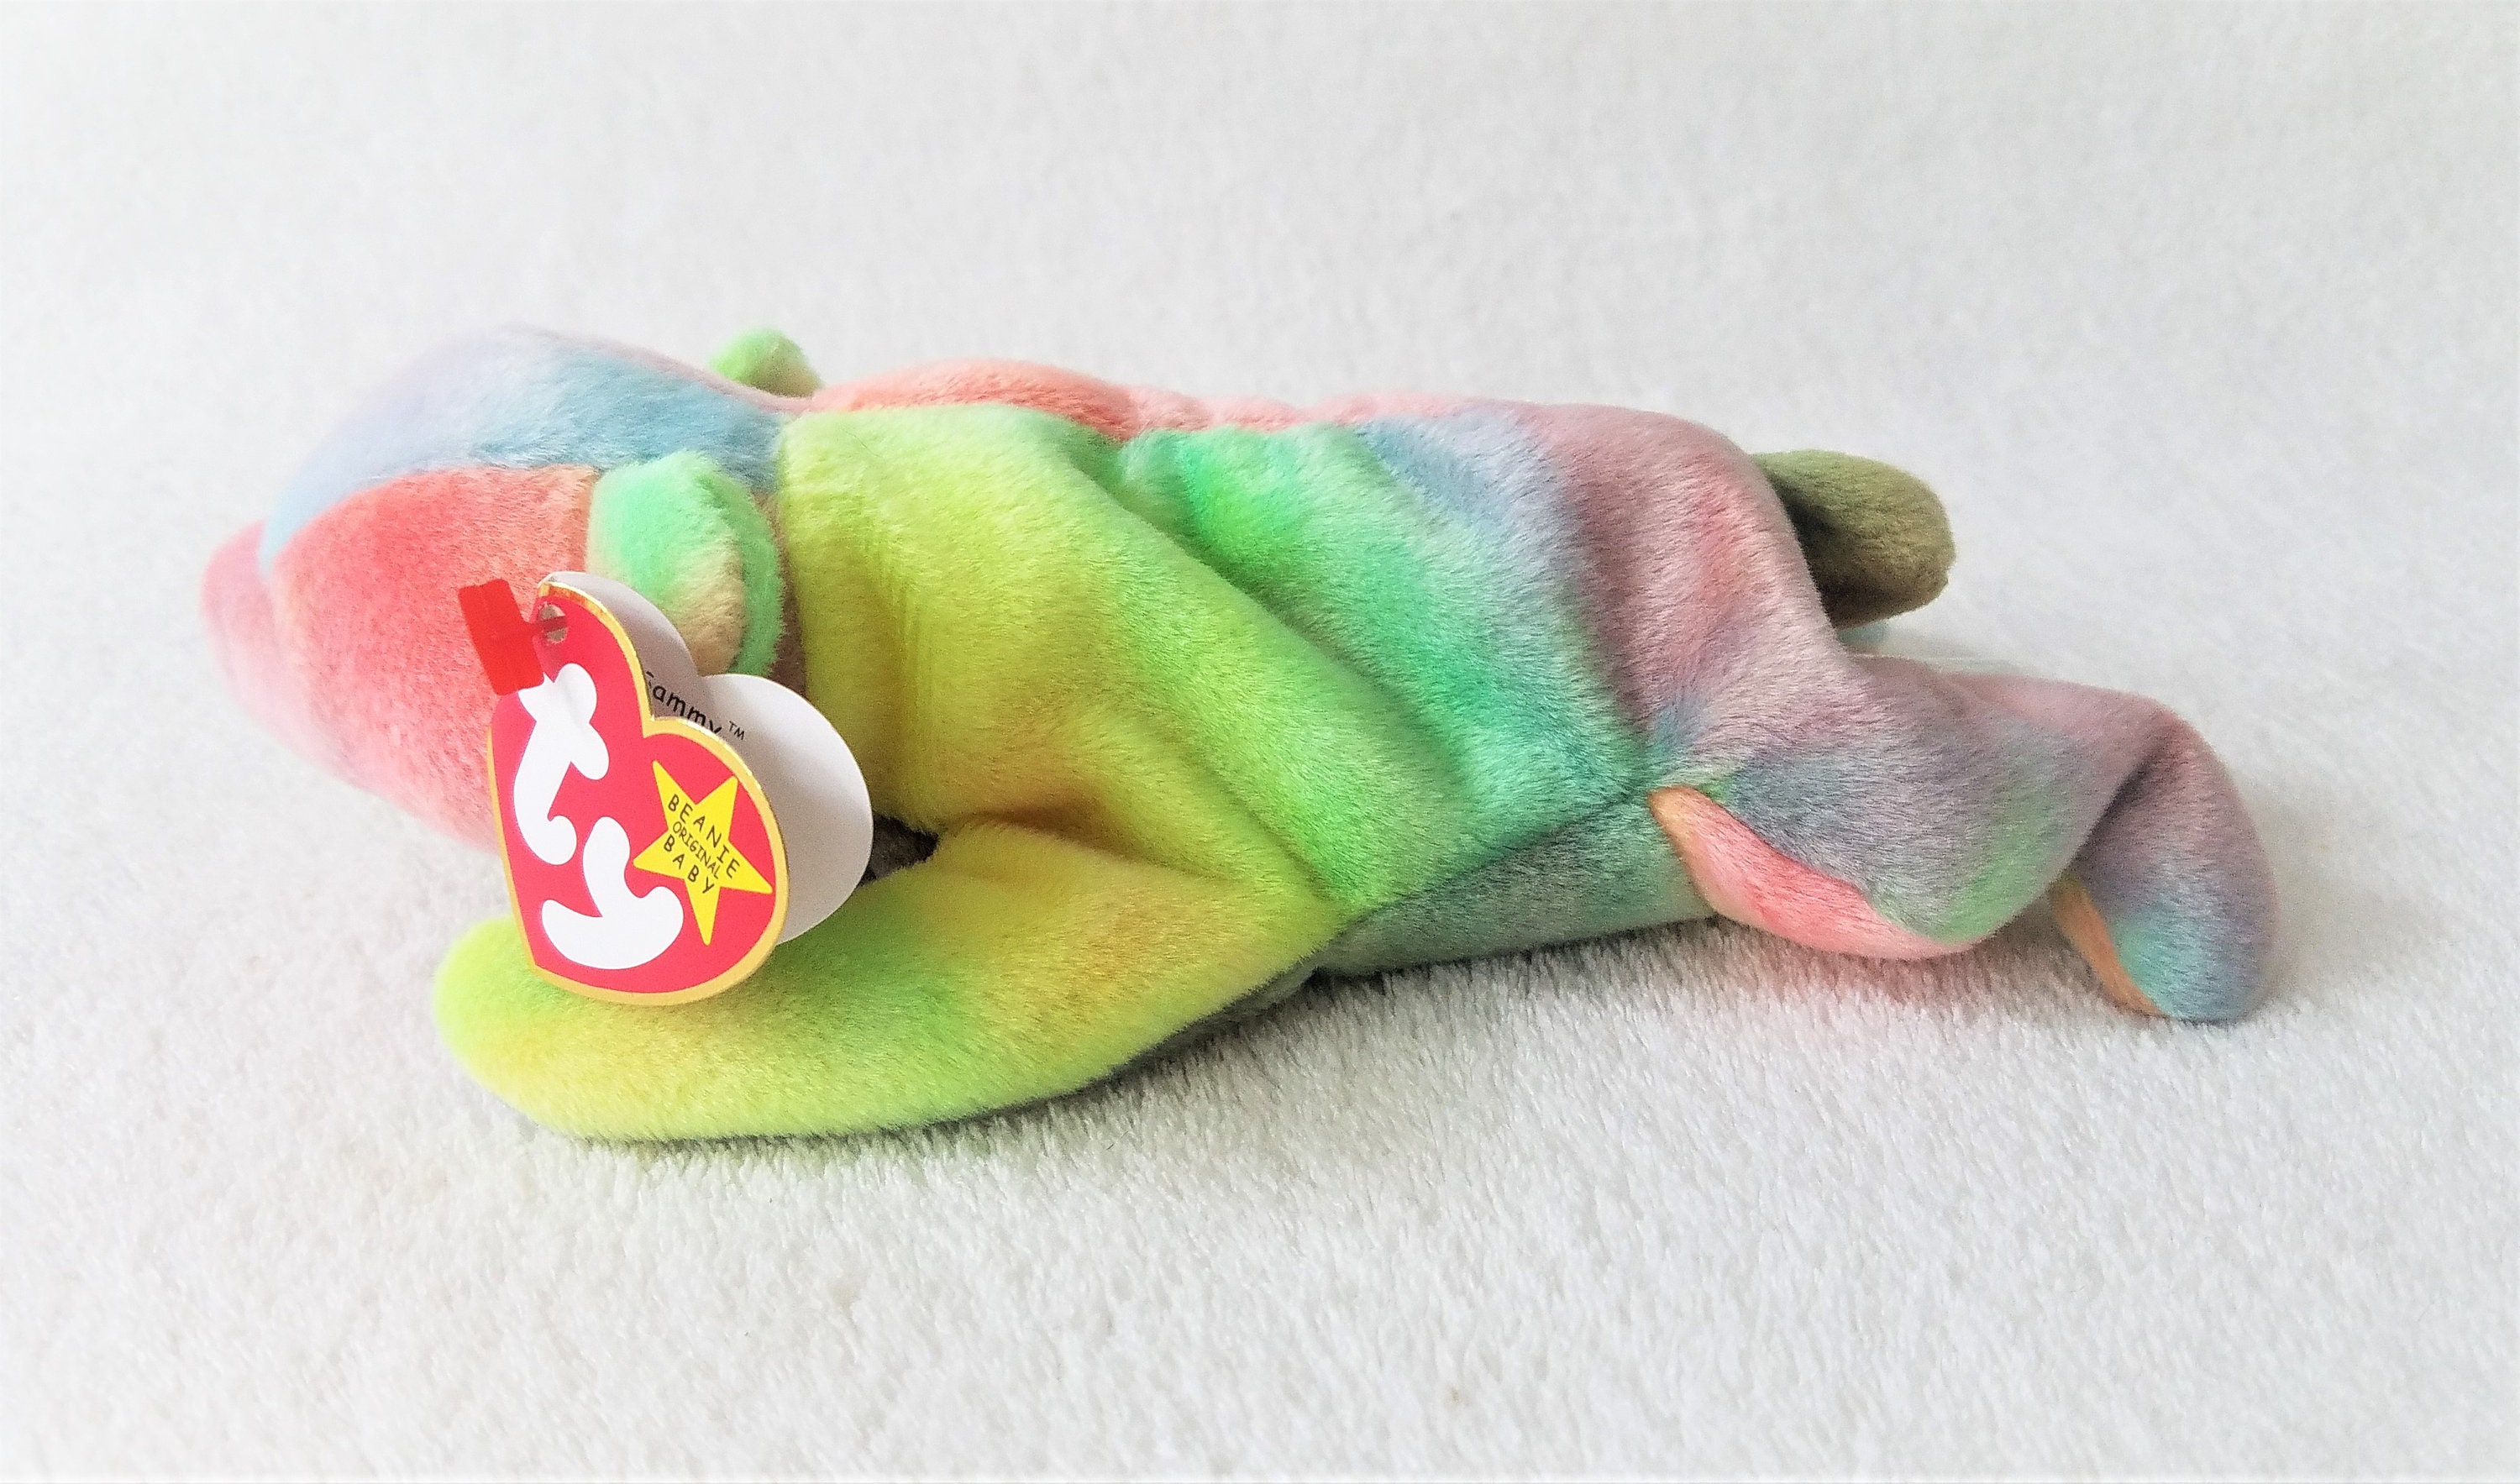 Details about   TY Beanie Baby Sammy the tye-dyed Bear *MWMT* 